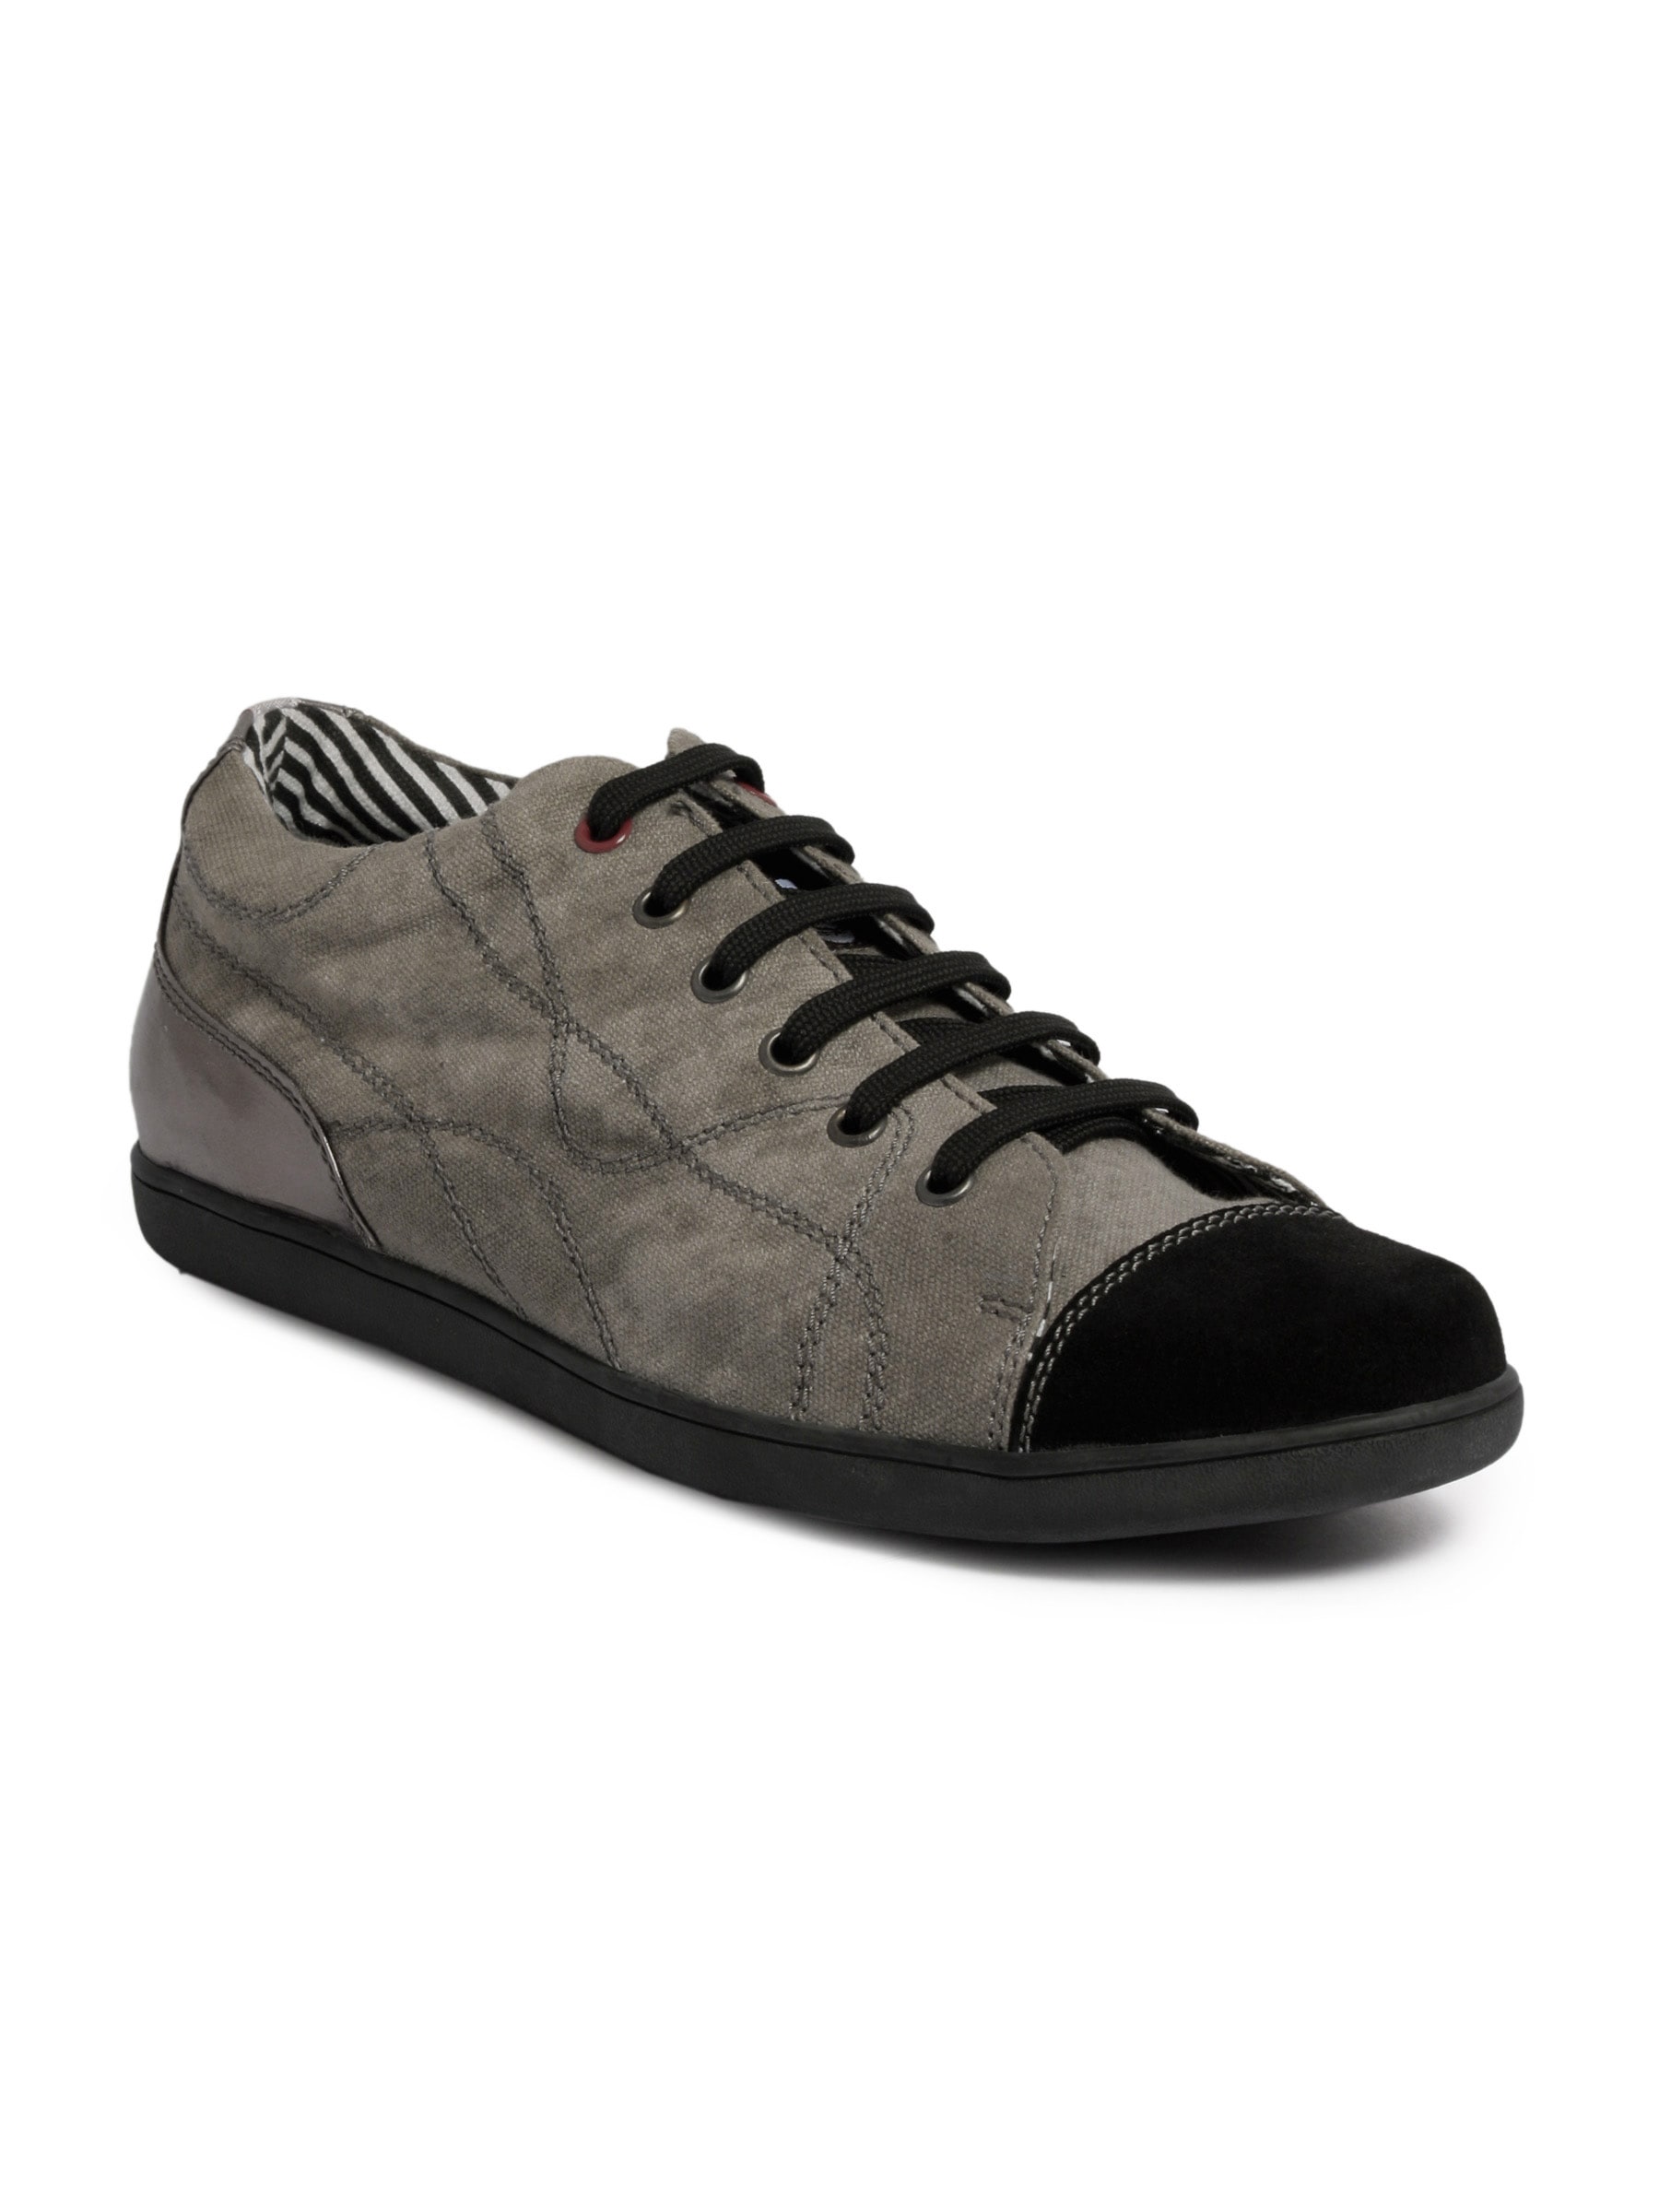 Flying Machine Men Casual Grey Casual Shoes